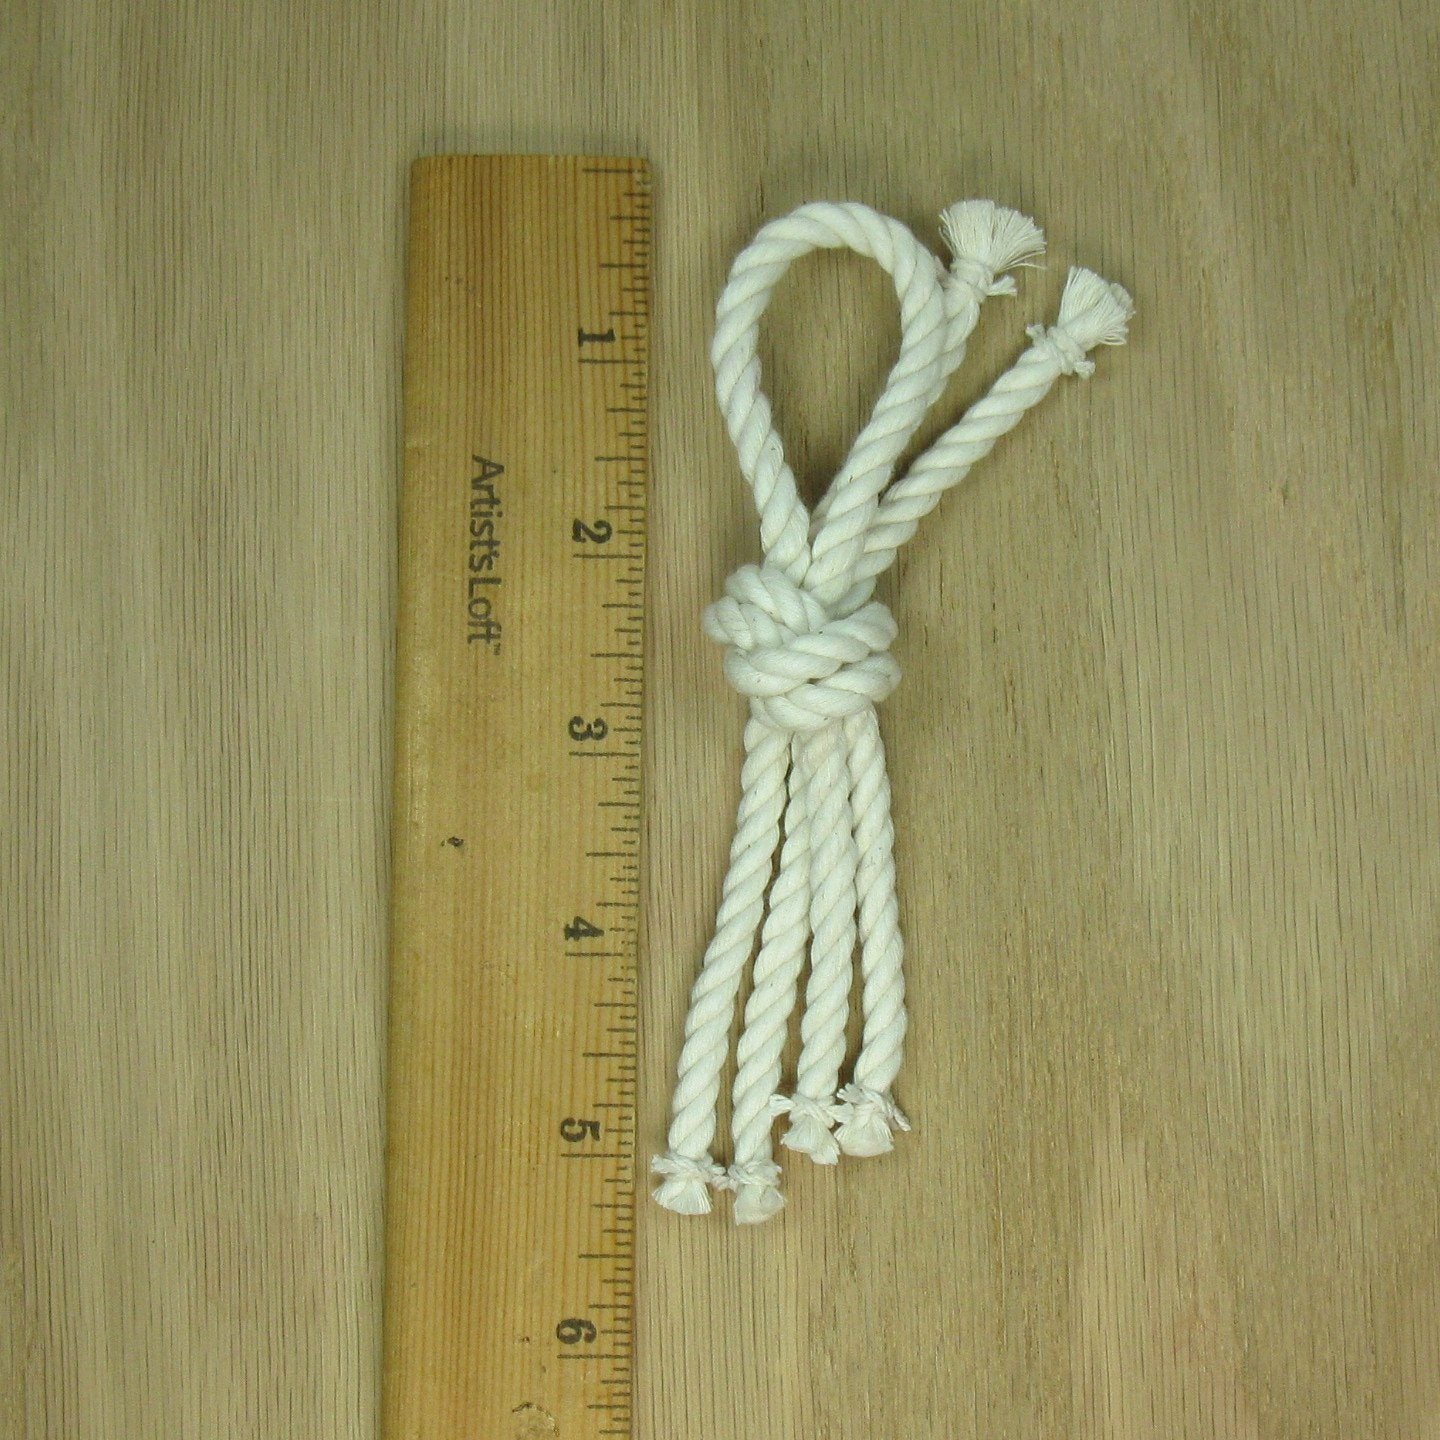 Nautical Knot Overhand Knot Boutonniere handmade at Mystic Knotwork